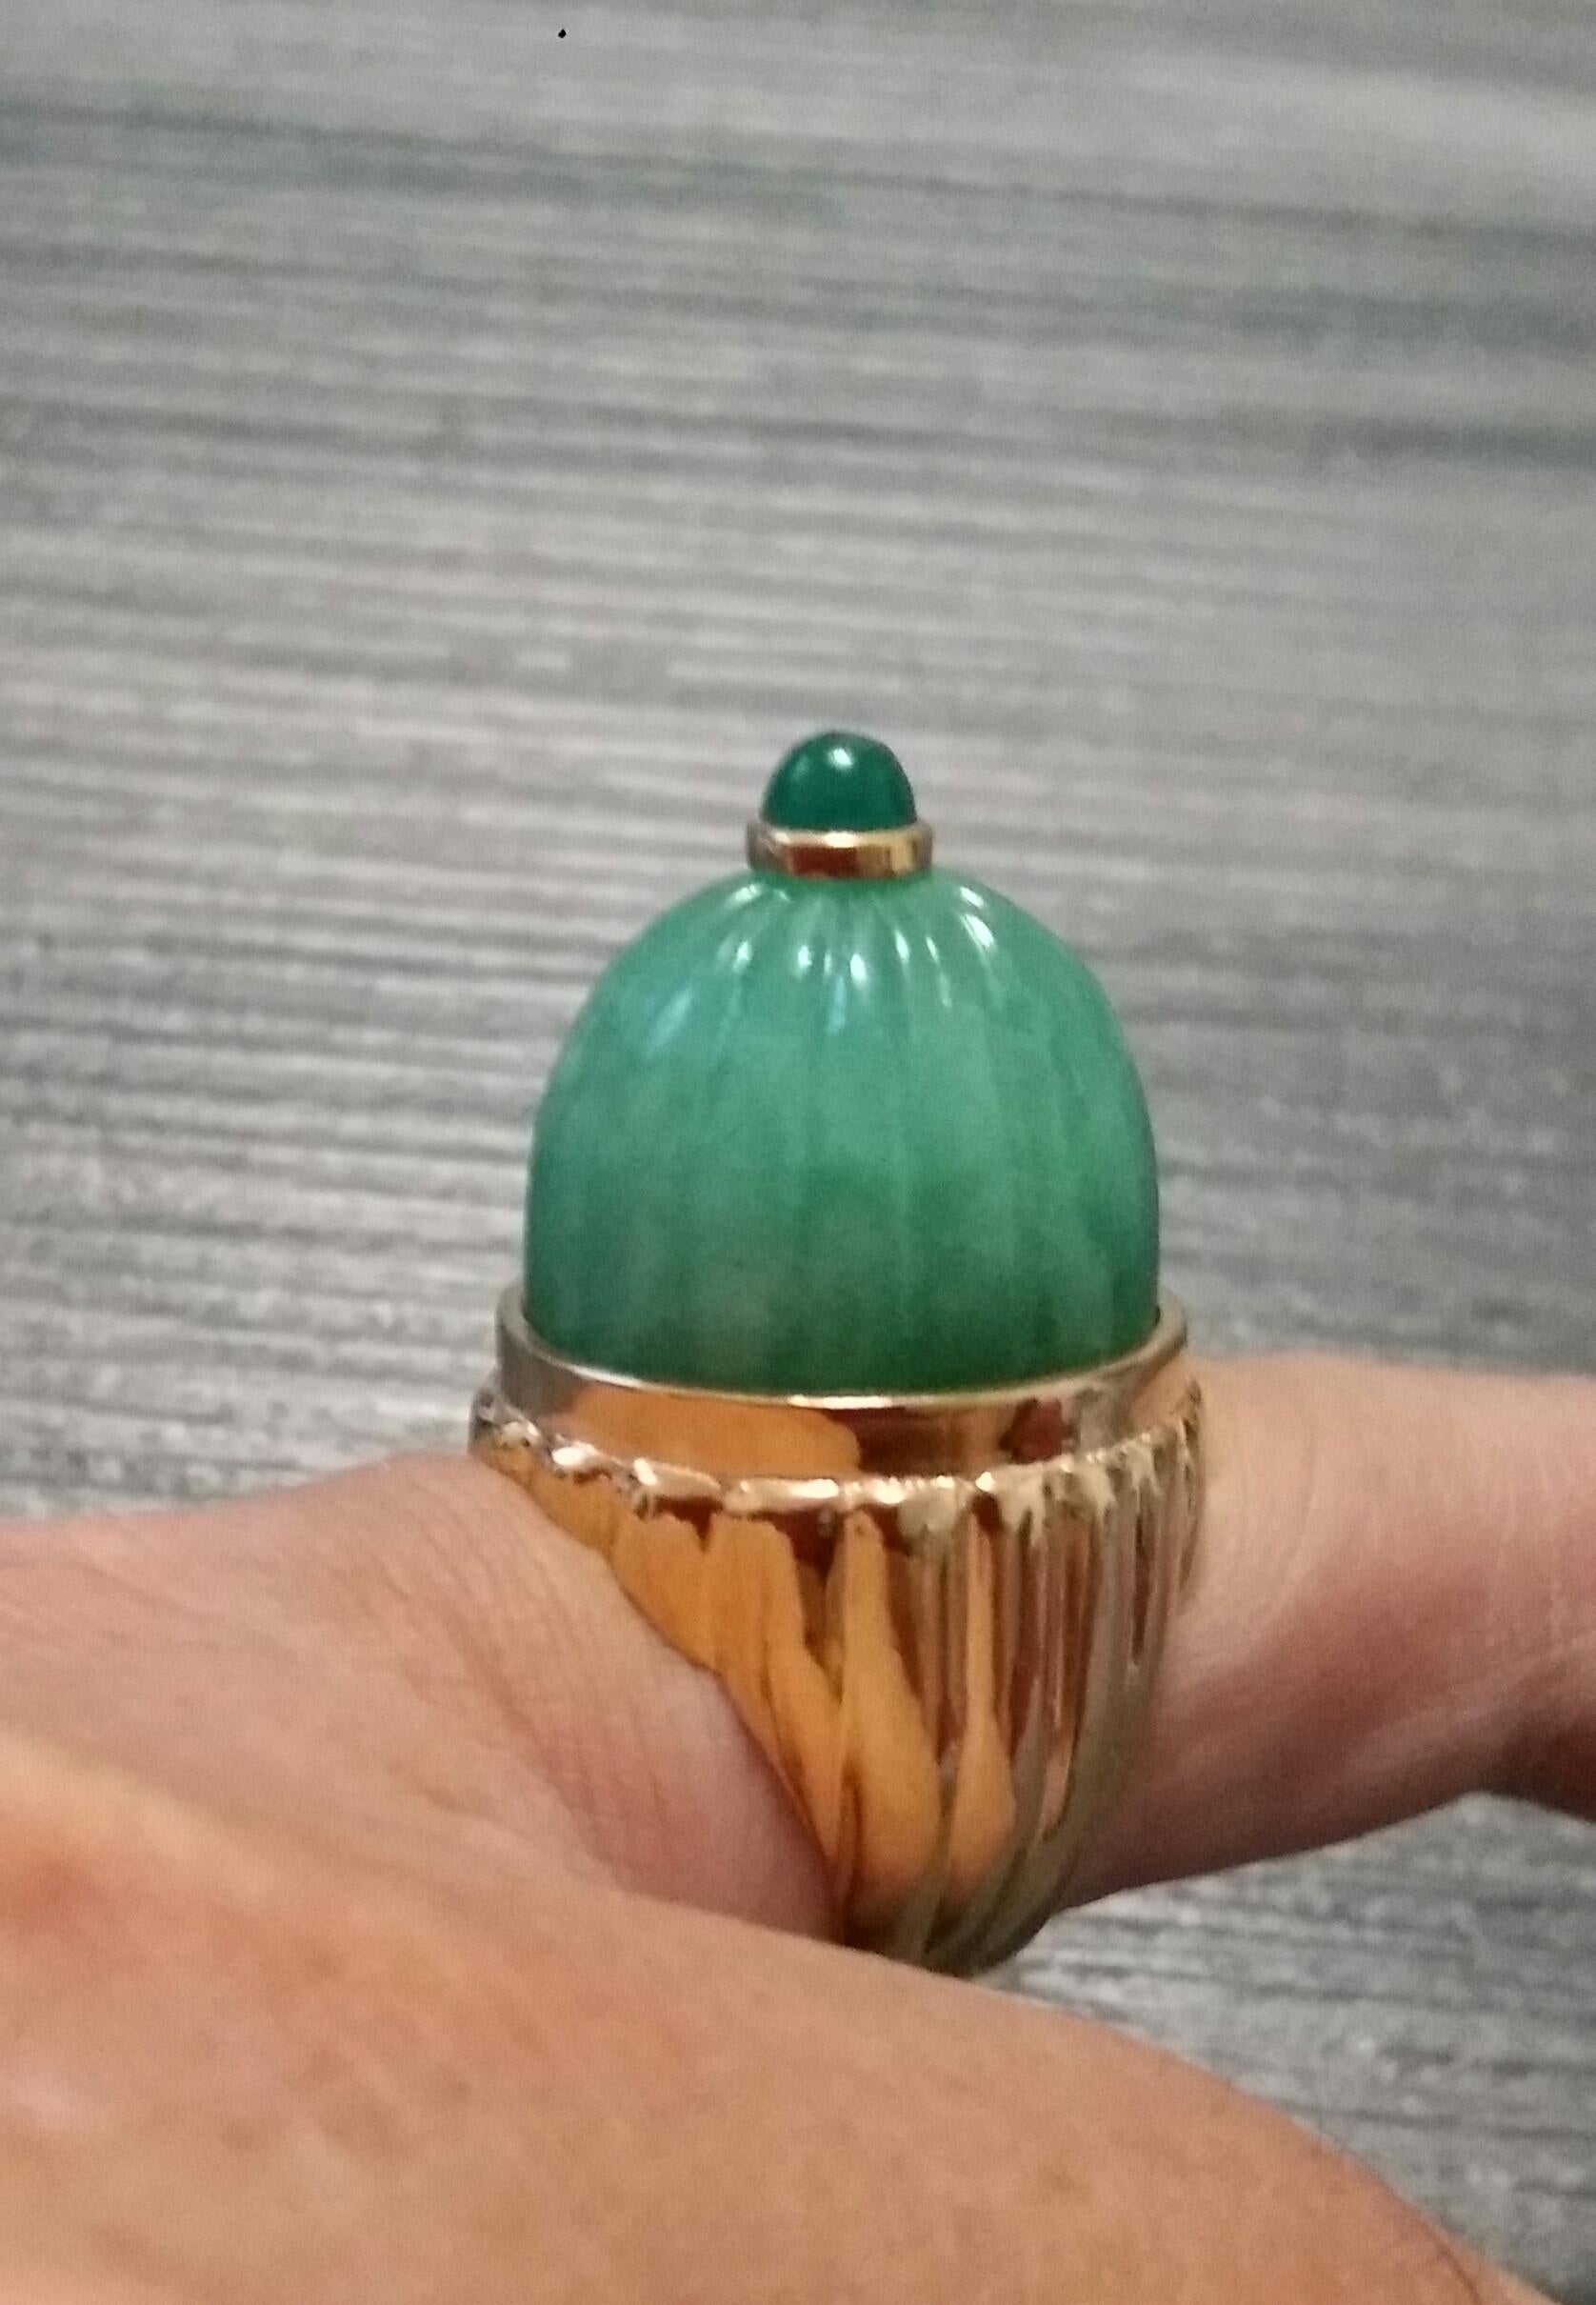 Engraved Burma Jade Cabochon Emerald Cabochon 14 Karat Solid Yellow Gold Ring For Sale 8